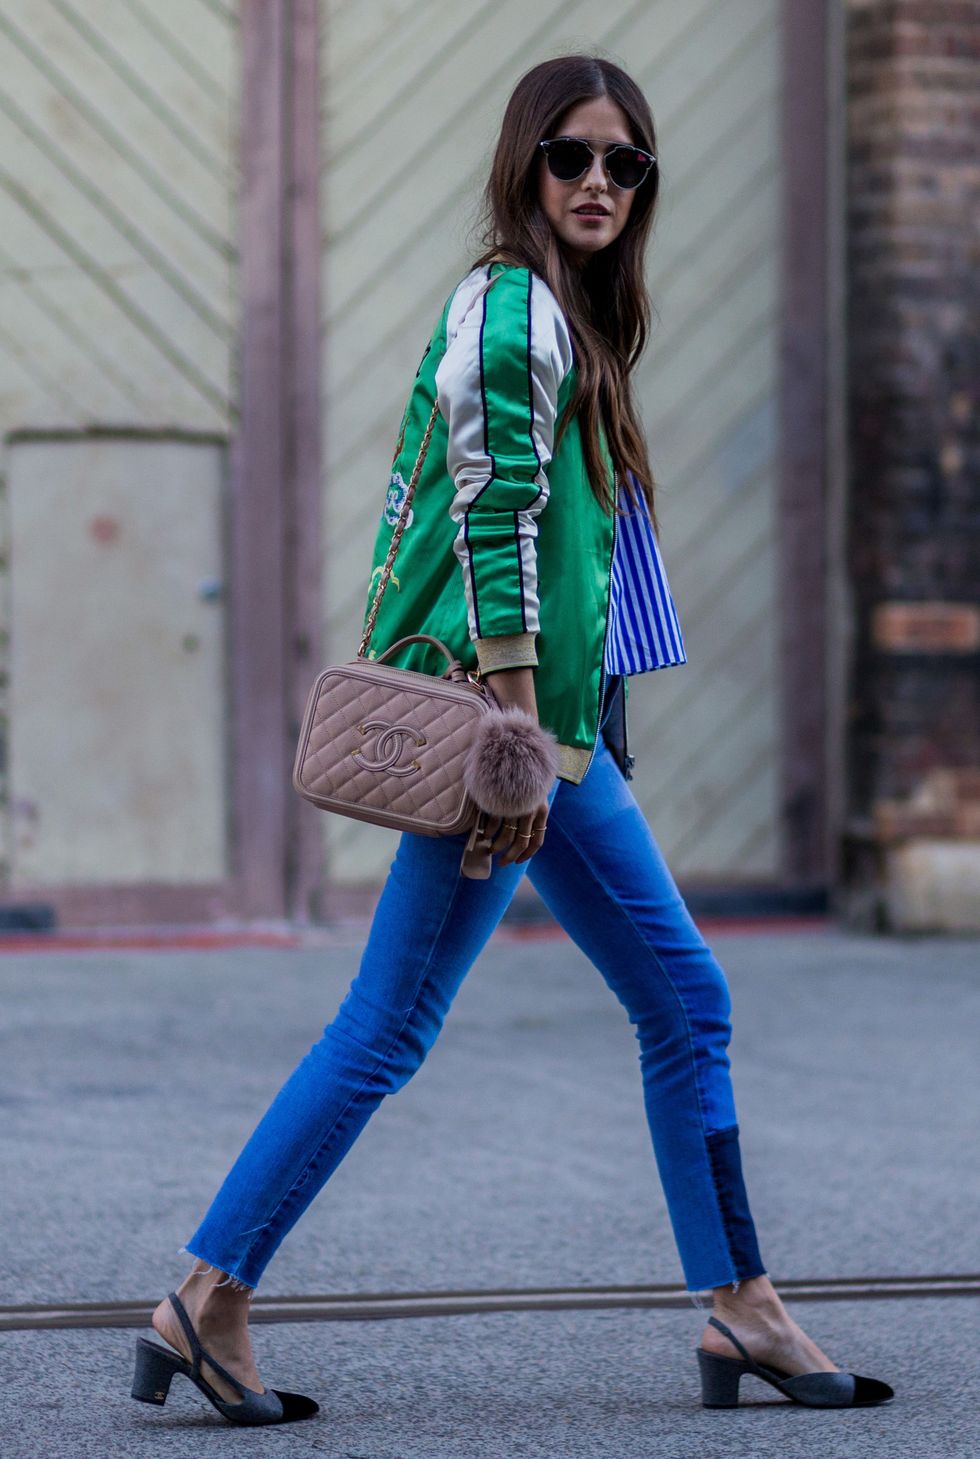 Clothing, Street fashion, Jeans, Cobalt blue, Blue, Electric blue, Fashion, Turquoise, Green, Footwear, 